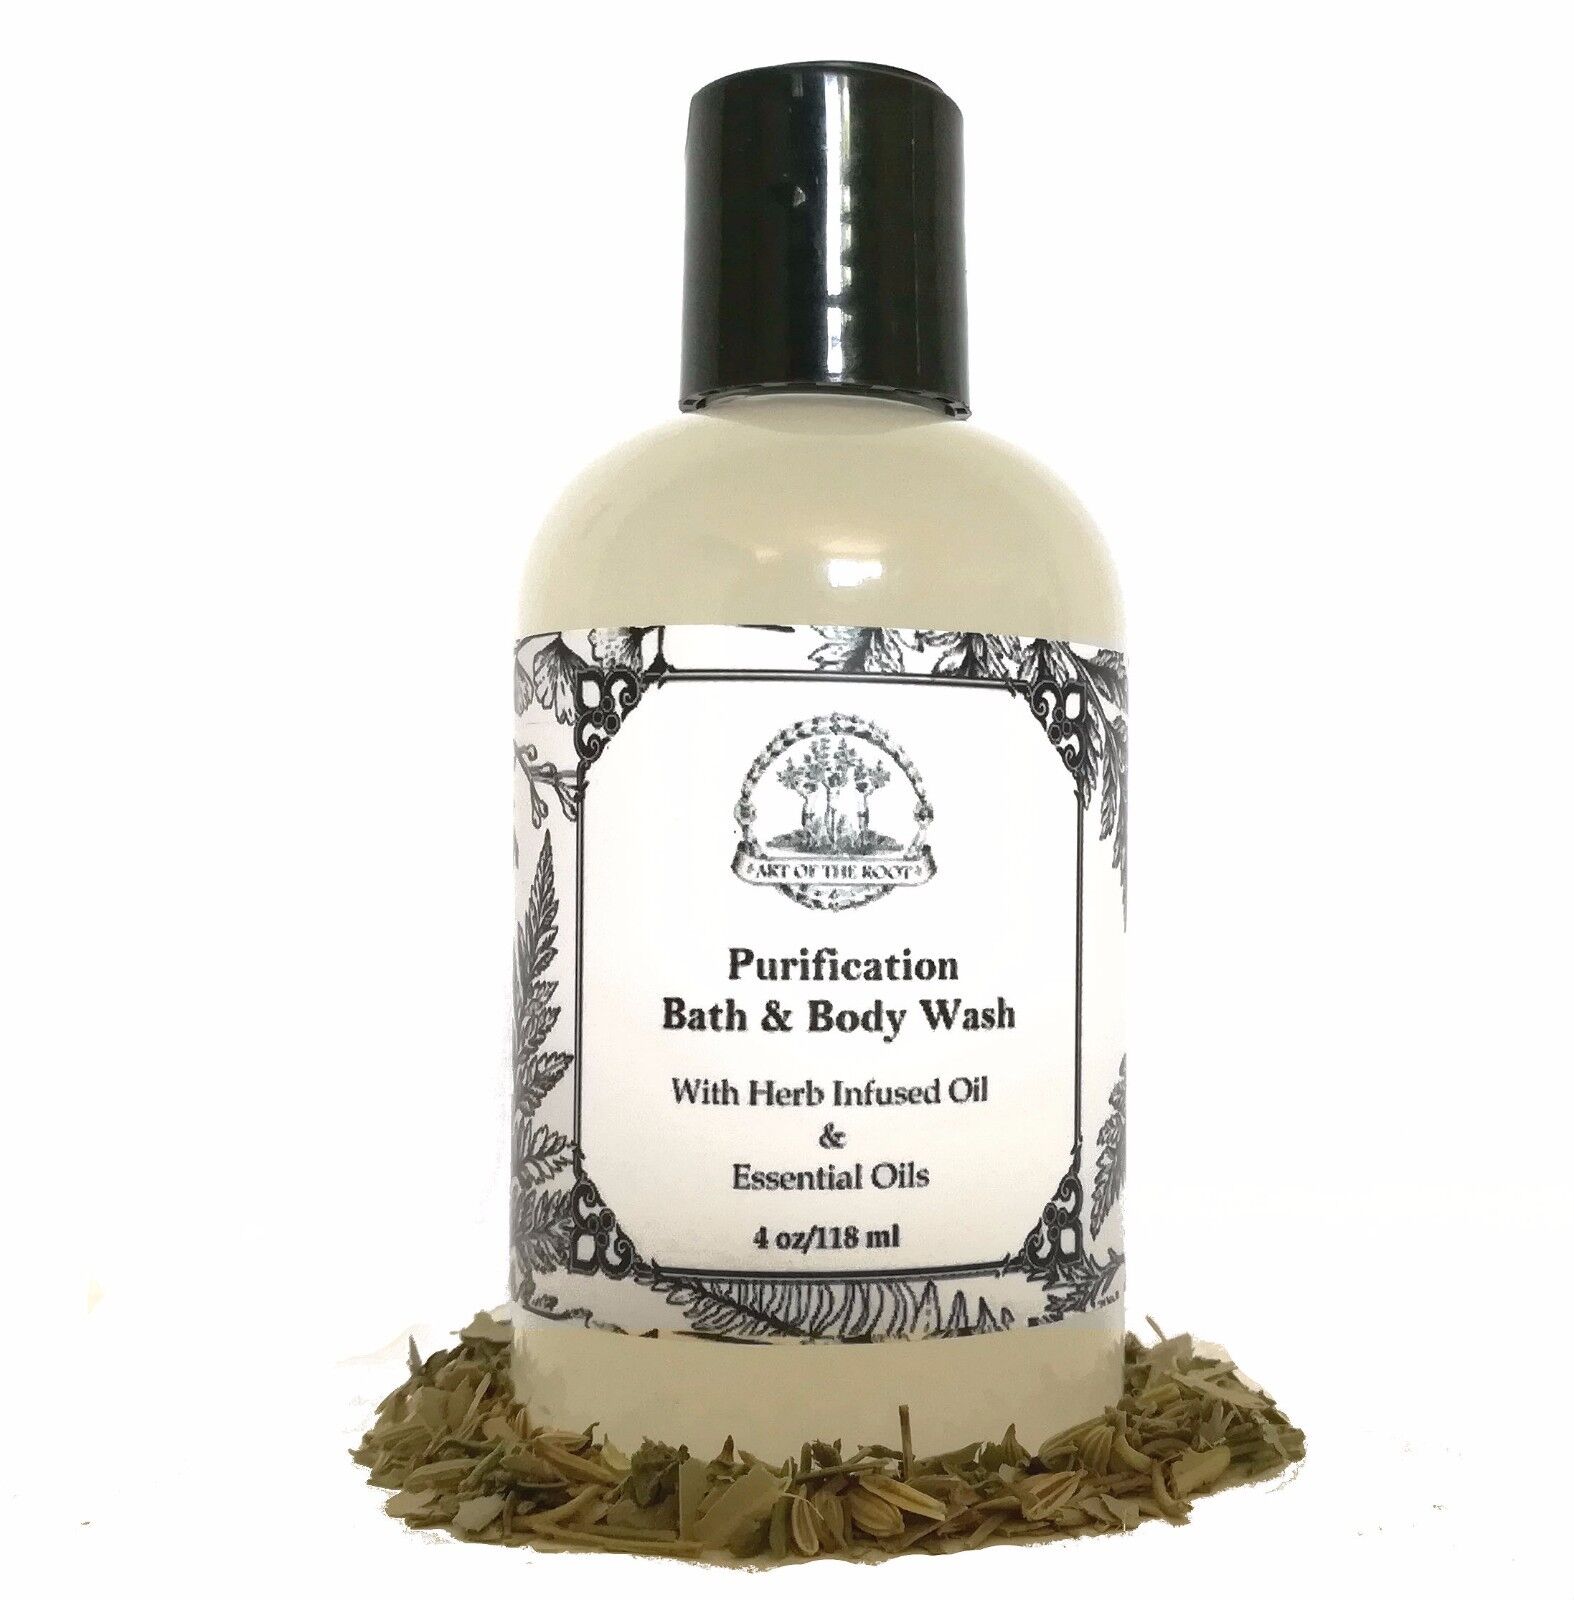 Purification Bath Gel for Cleansing & Purification Hoodoo Voodoo Wicca Pagan